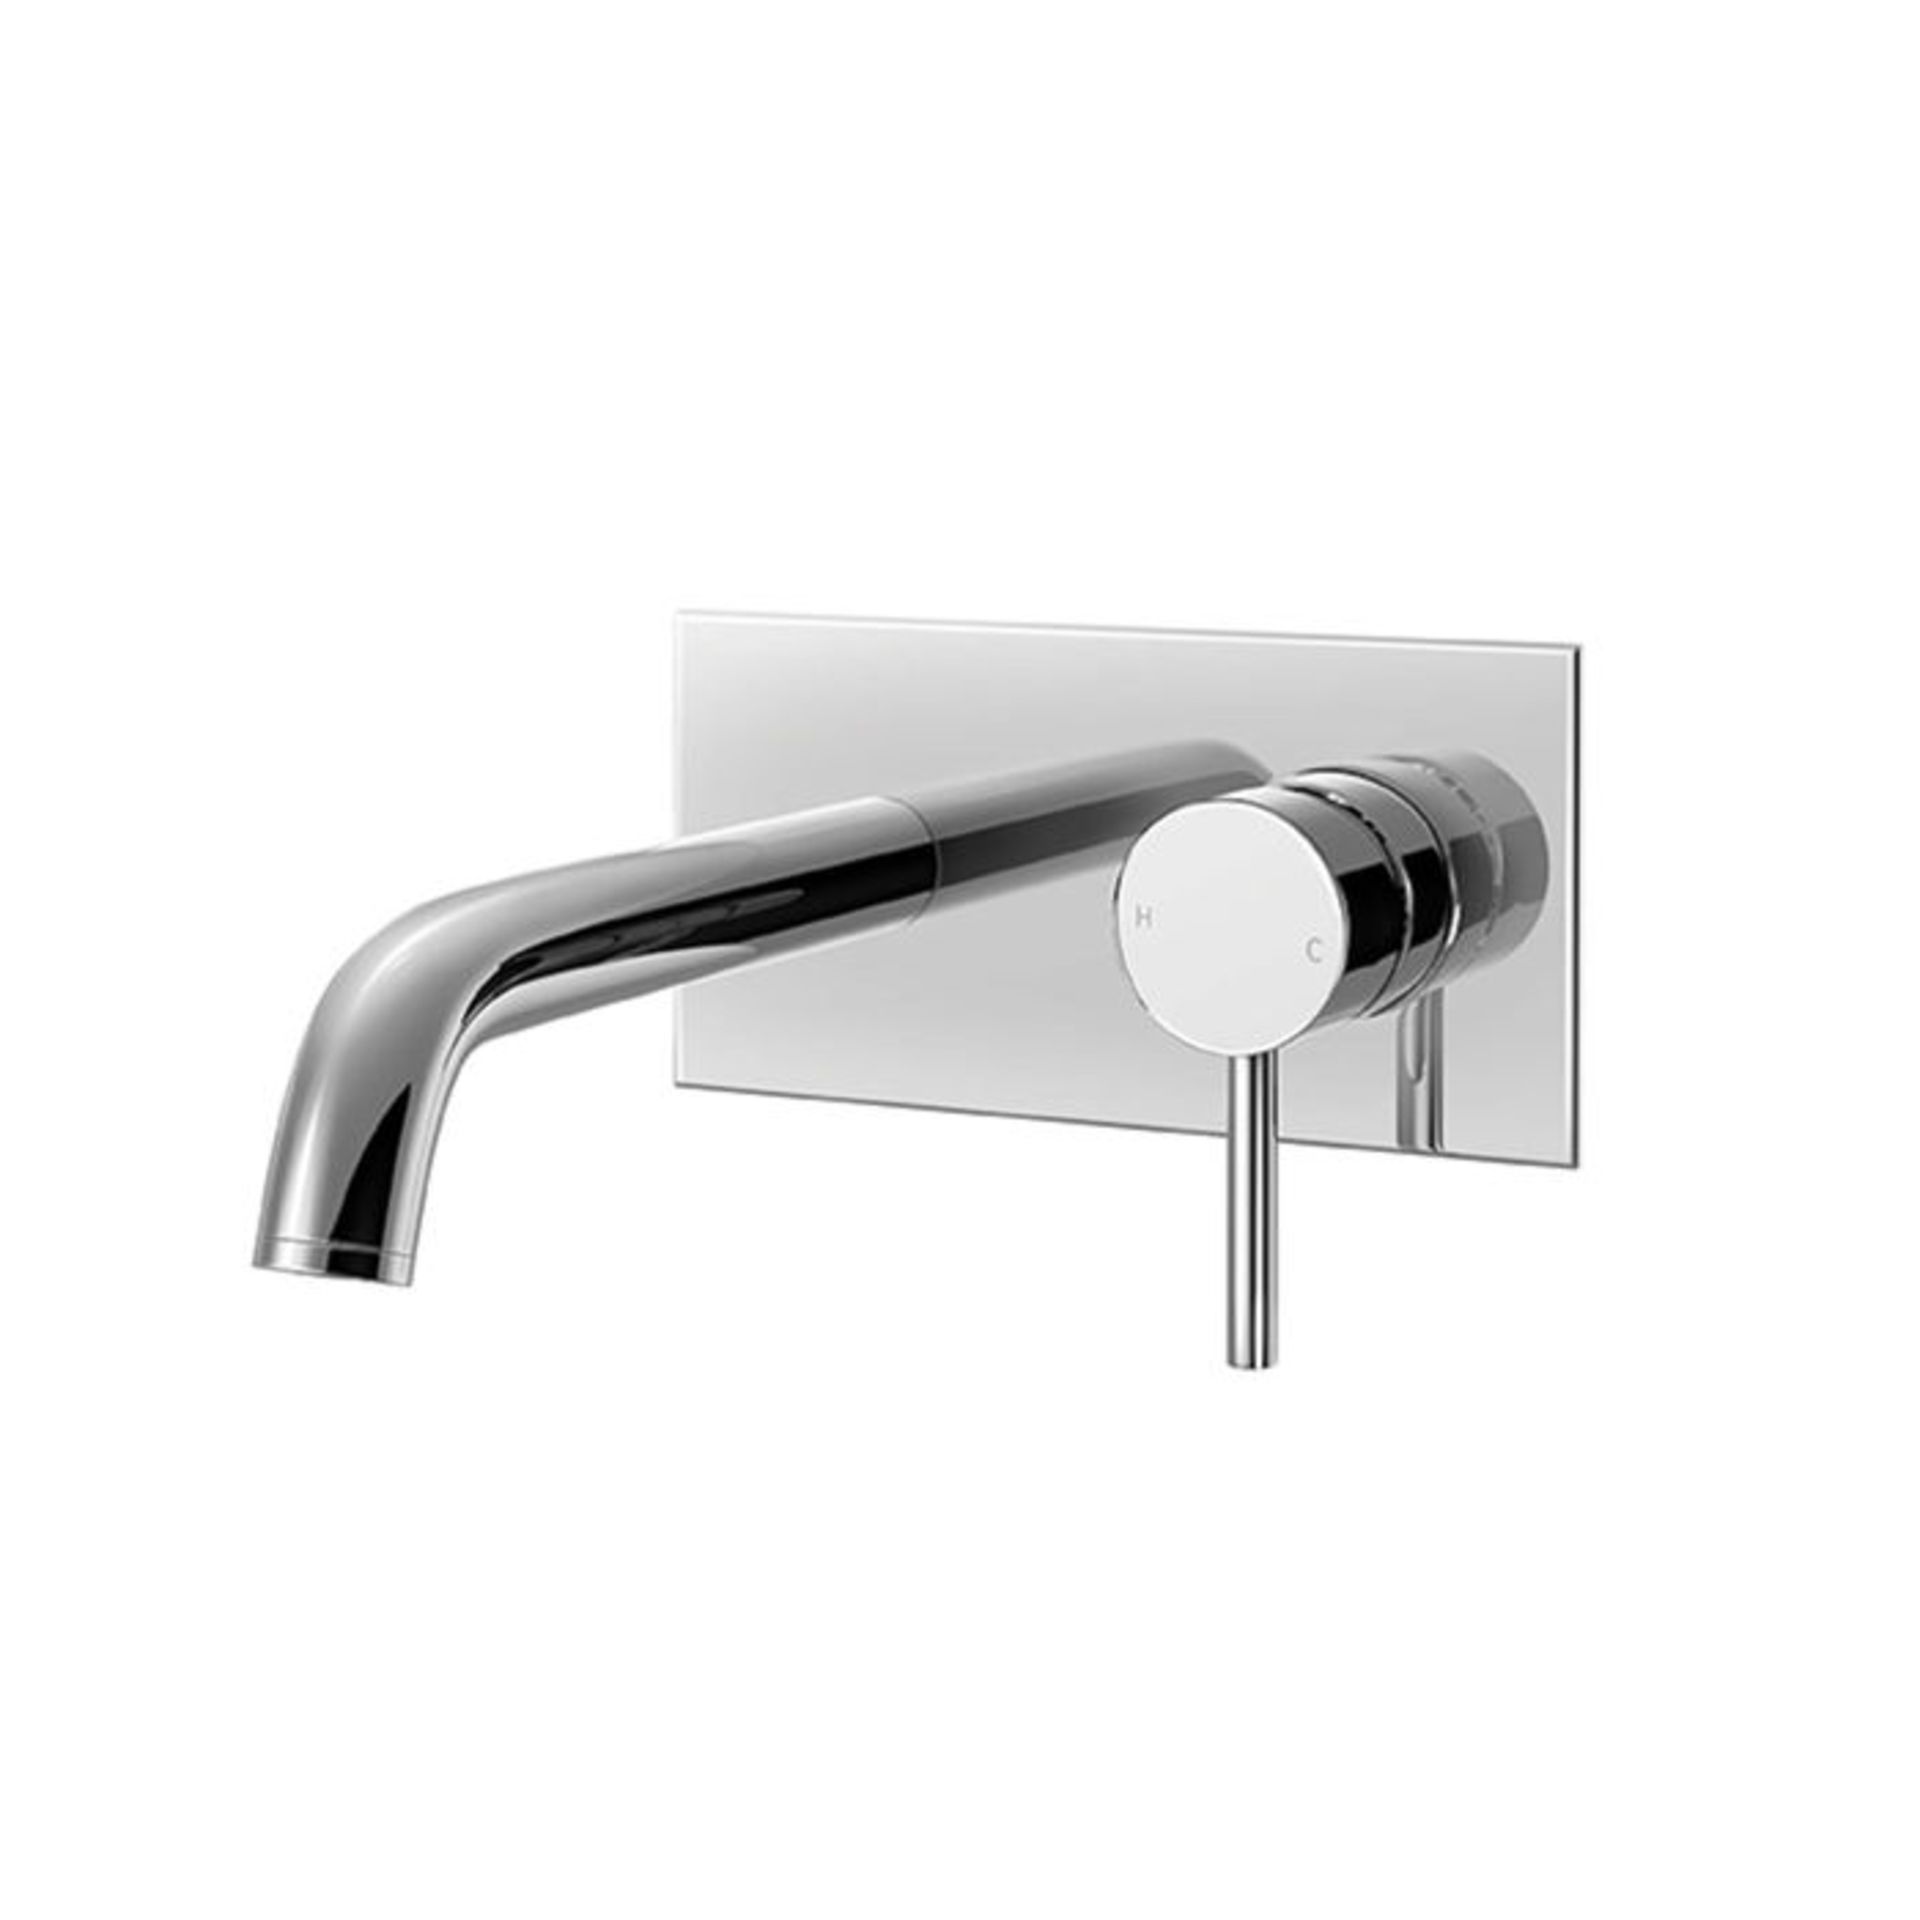 (SM8) Wall Mounted Bath Mixer Tap. Wall mounted style is simple The perfect partner for our range of